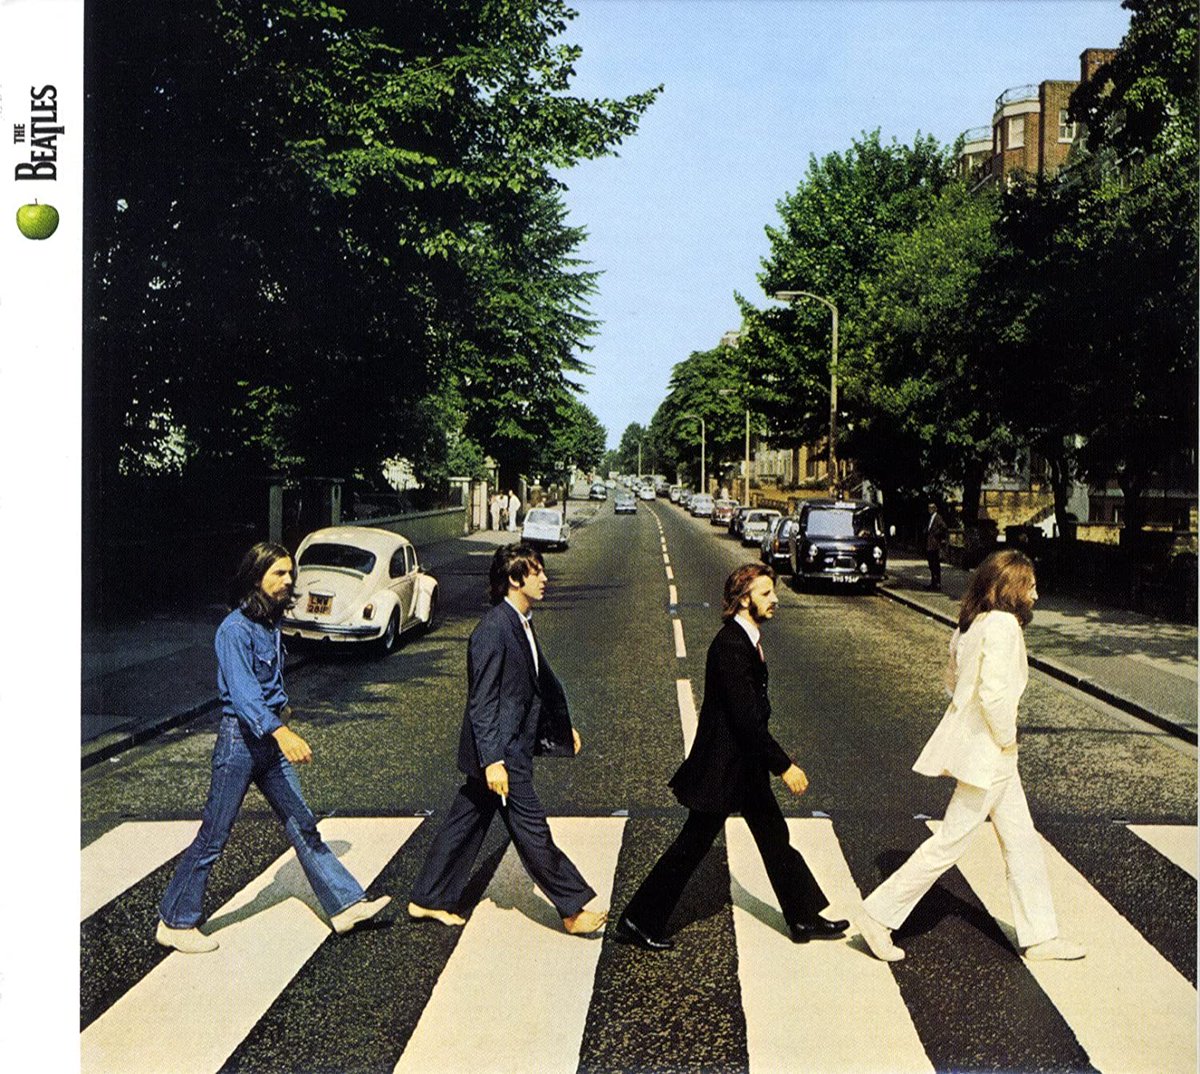 ofc we all know the famous Abbey Road album cover